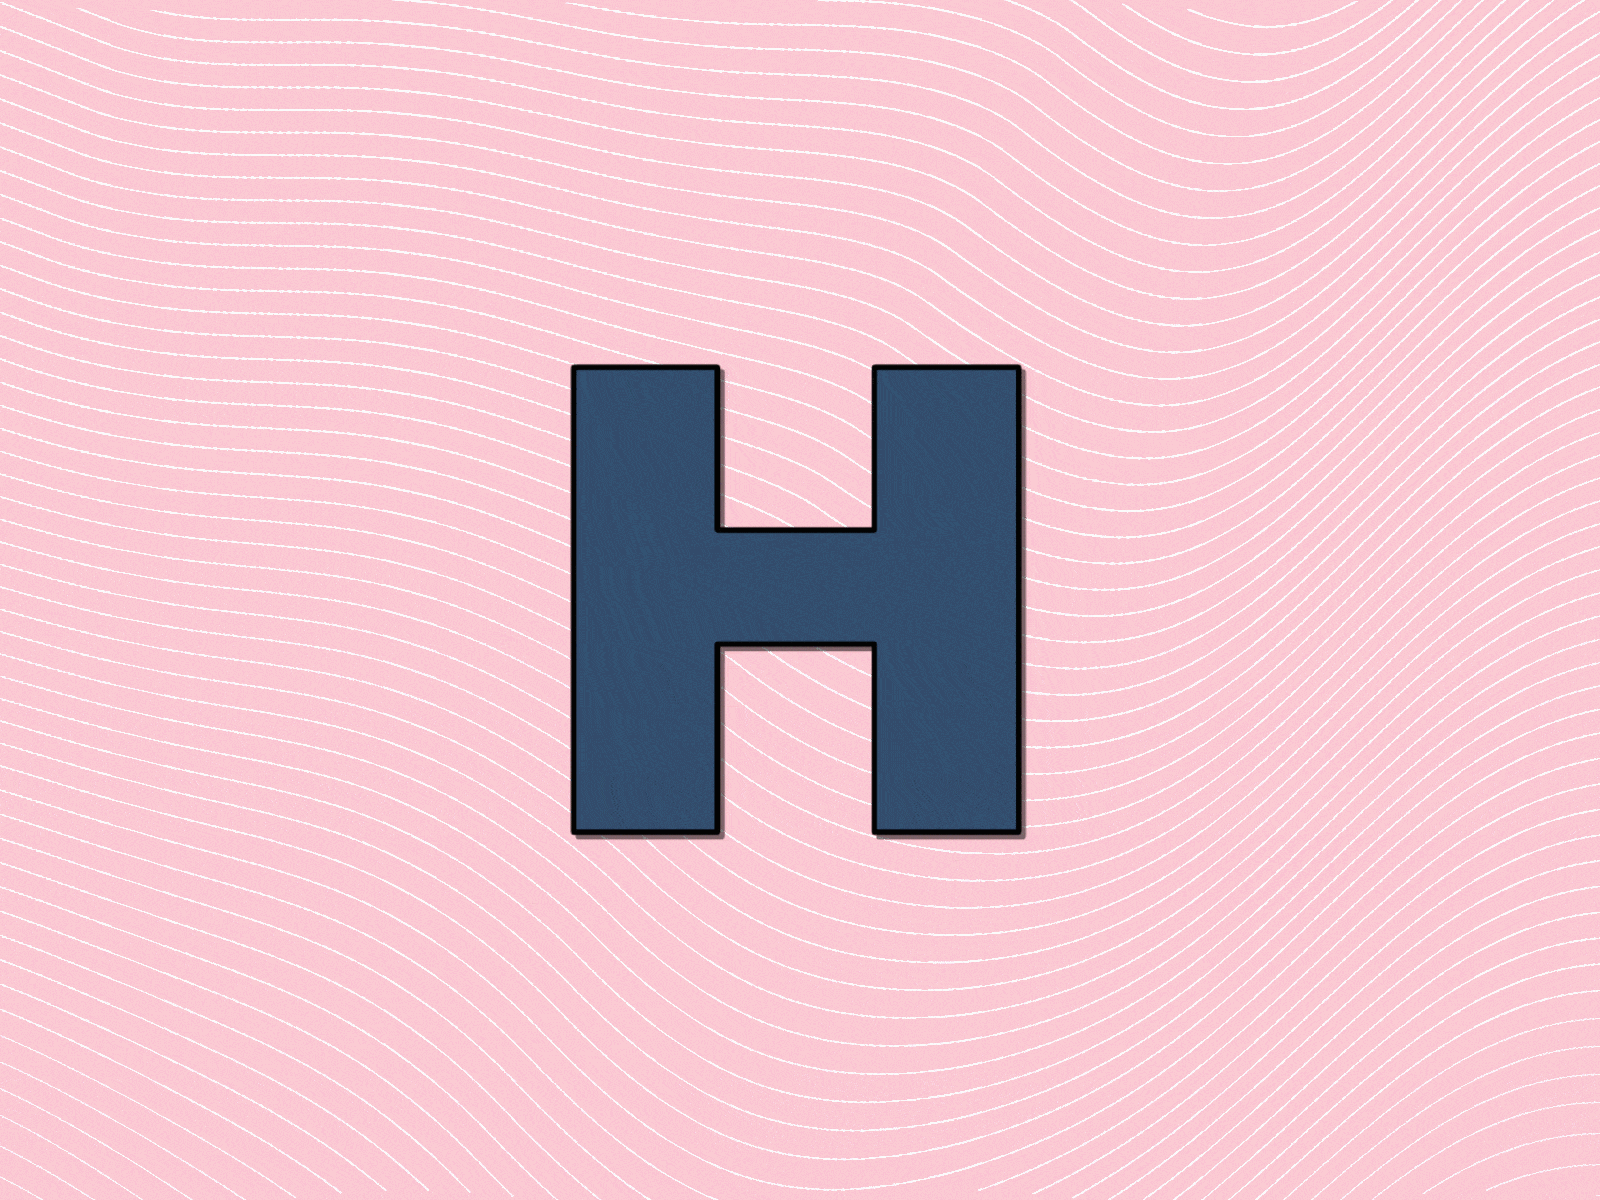 H for? 2danimation aftereffects animation animator cartoon colors design designer duplicate easy ease illustration letter motion motiongraphics typographic typography